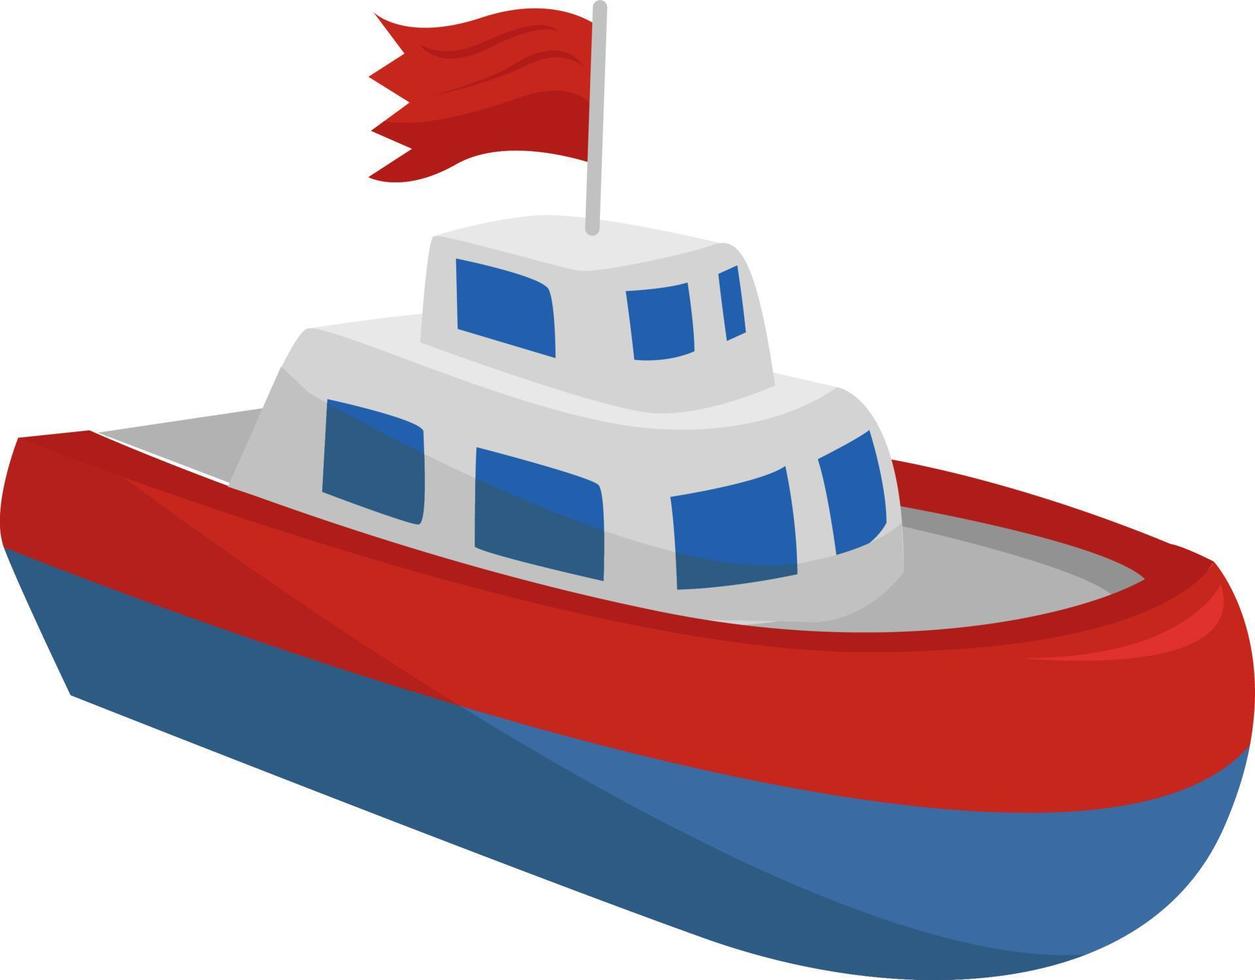 Toy ship, illustration, vector on white background